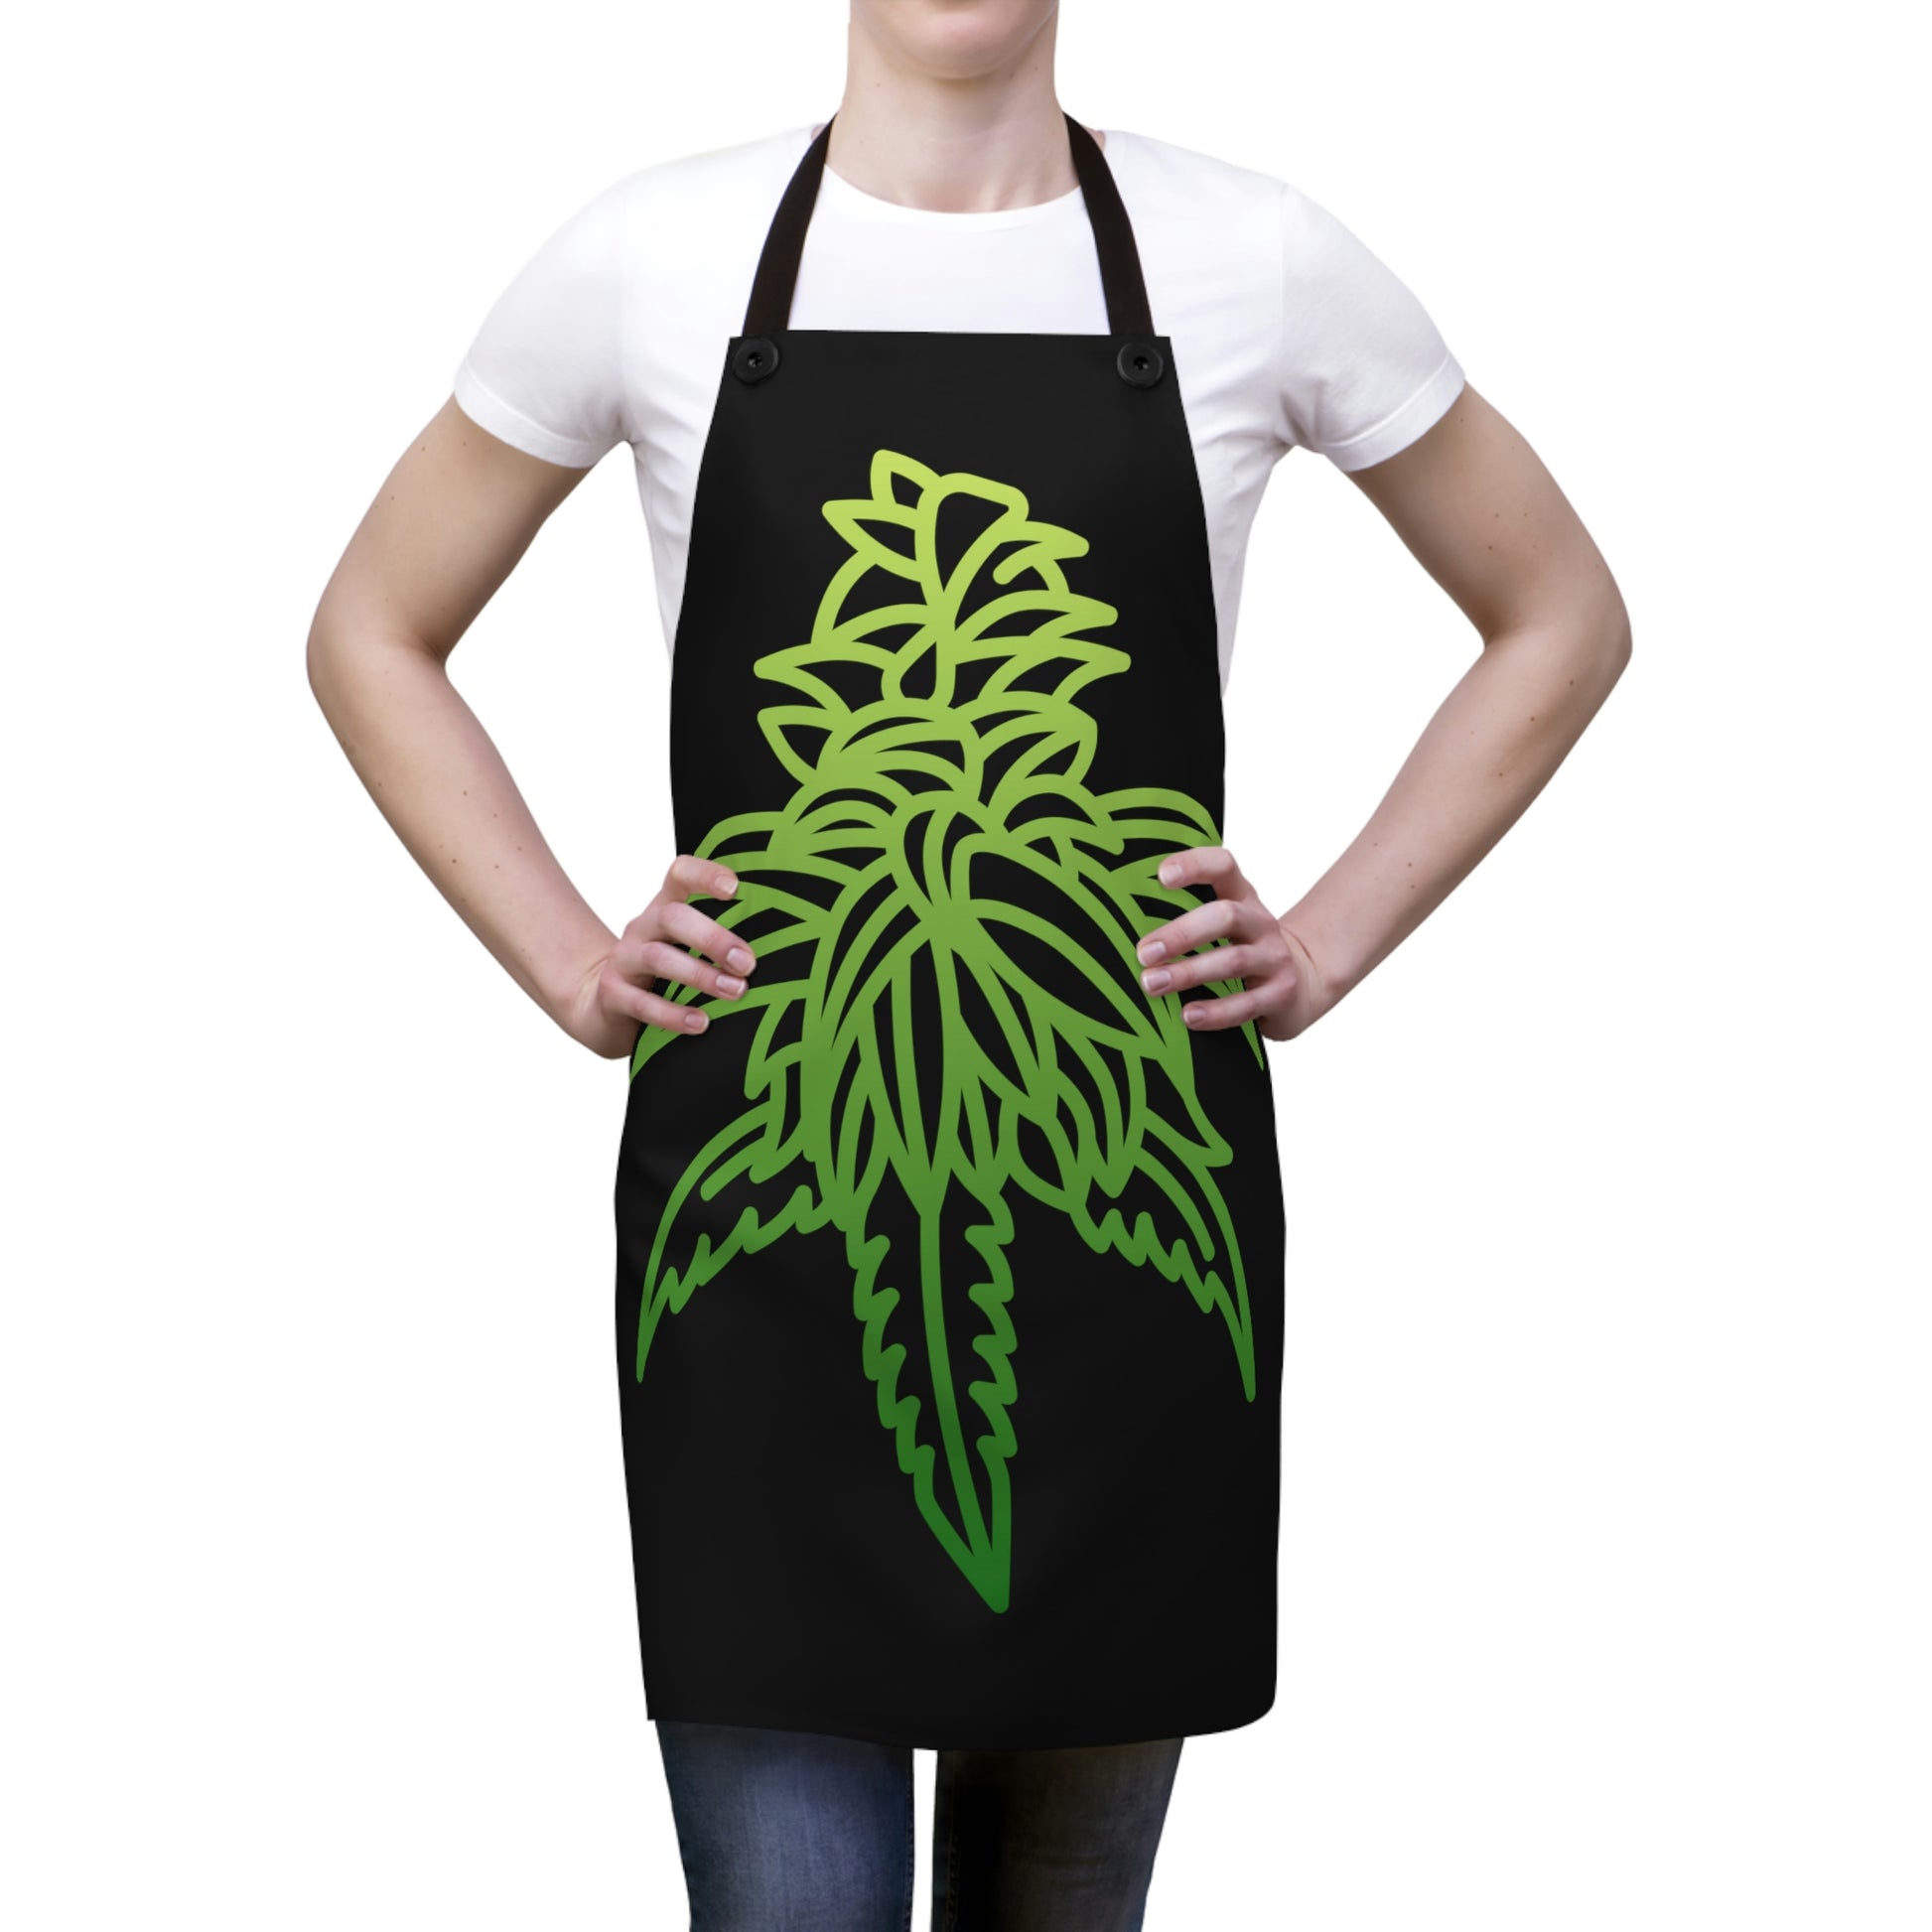 A young woman wears a Sour Diesel Cannabis Chef's Apron 